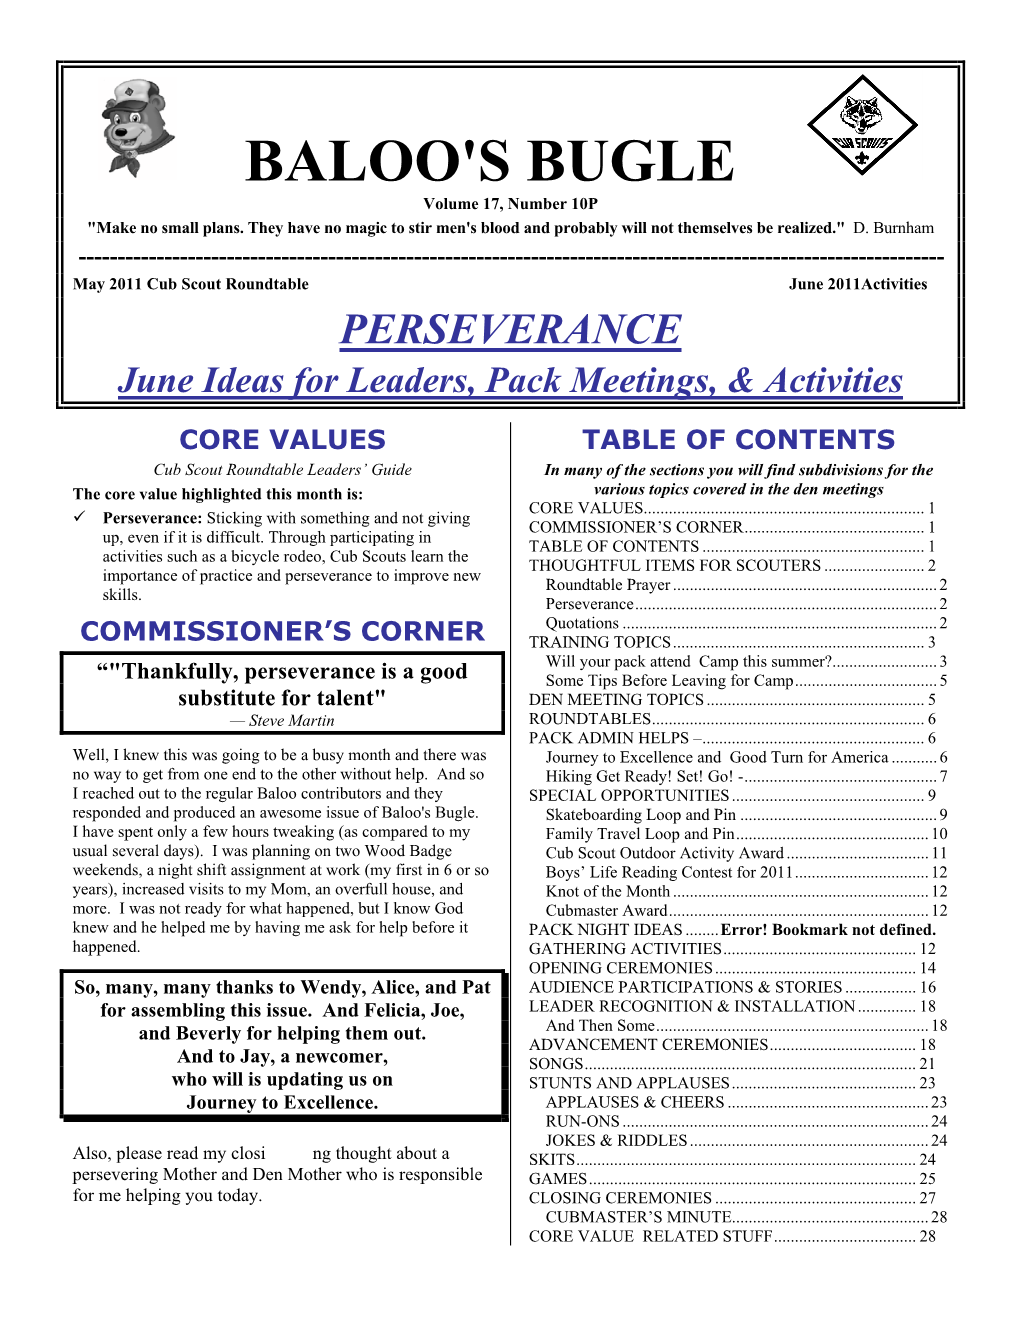 BALOO's BUGLE Volume 17, Number 10P "Make No Small Plans